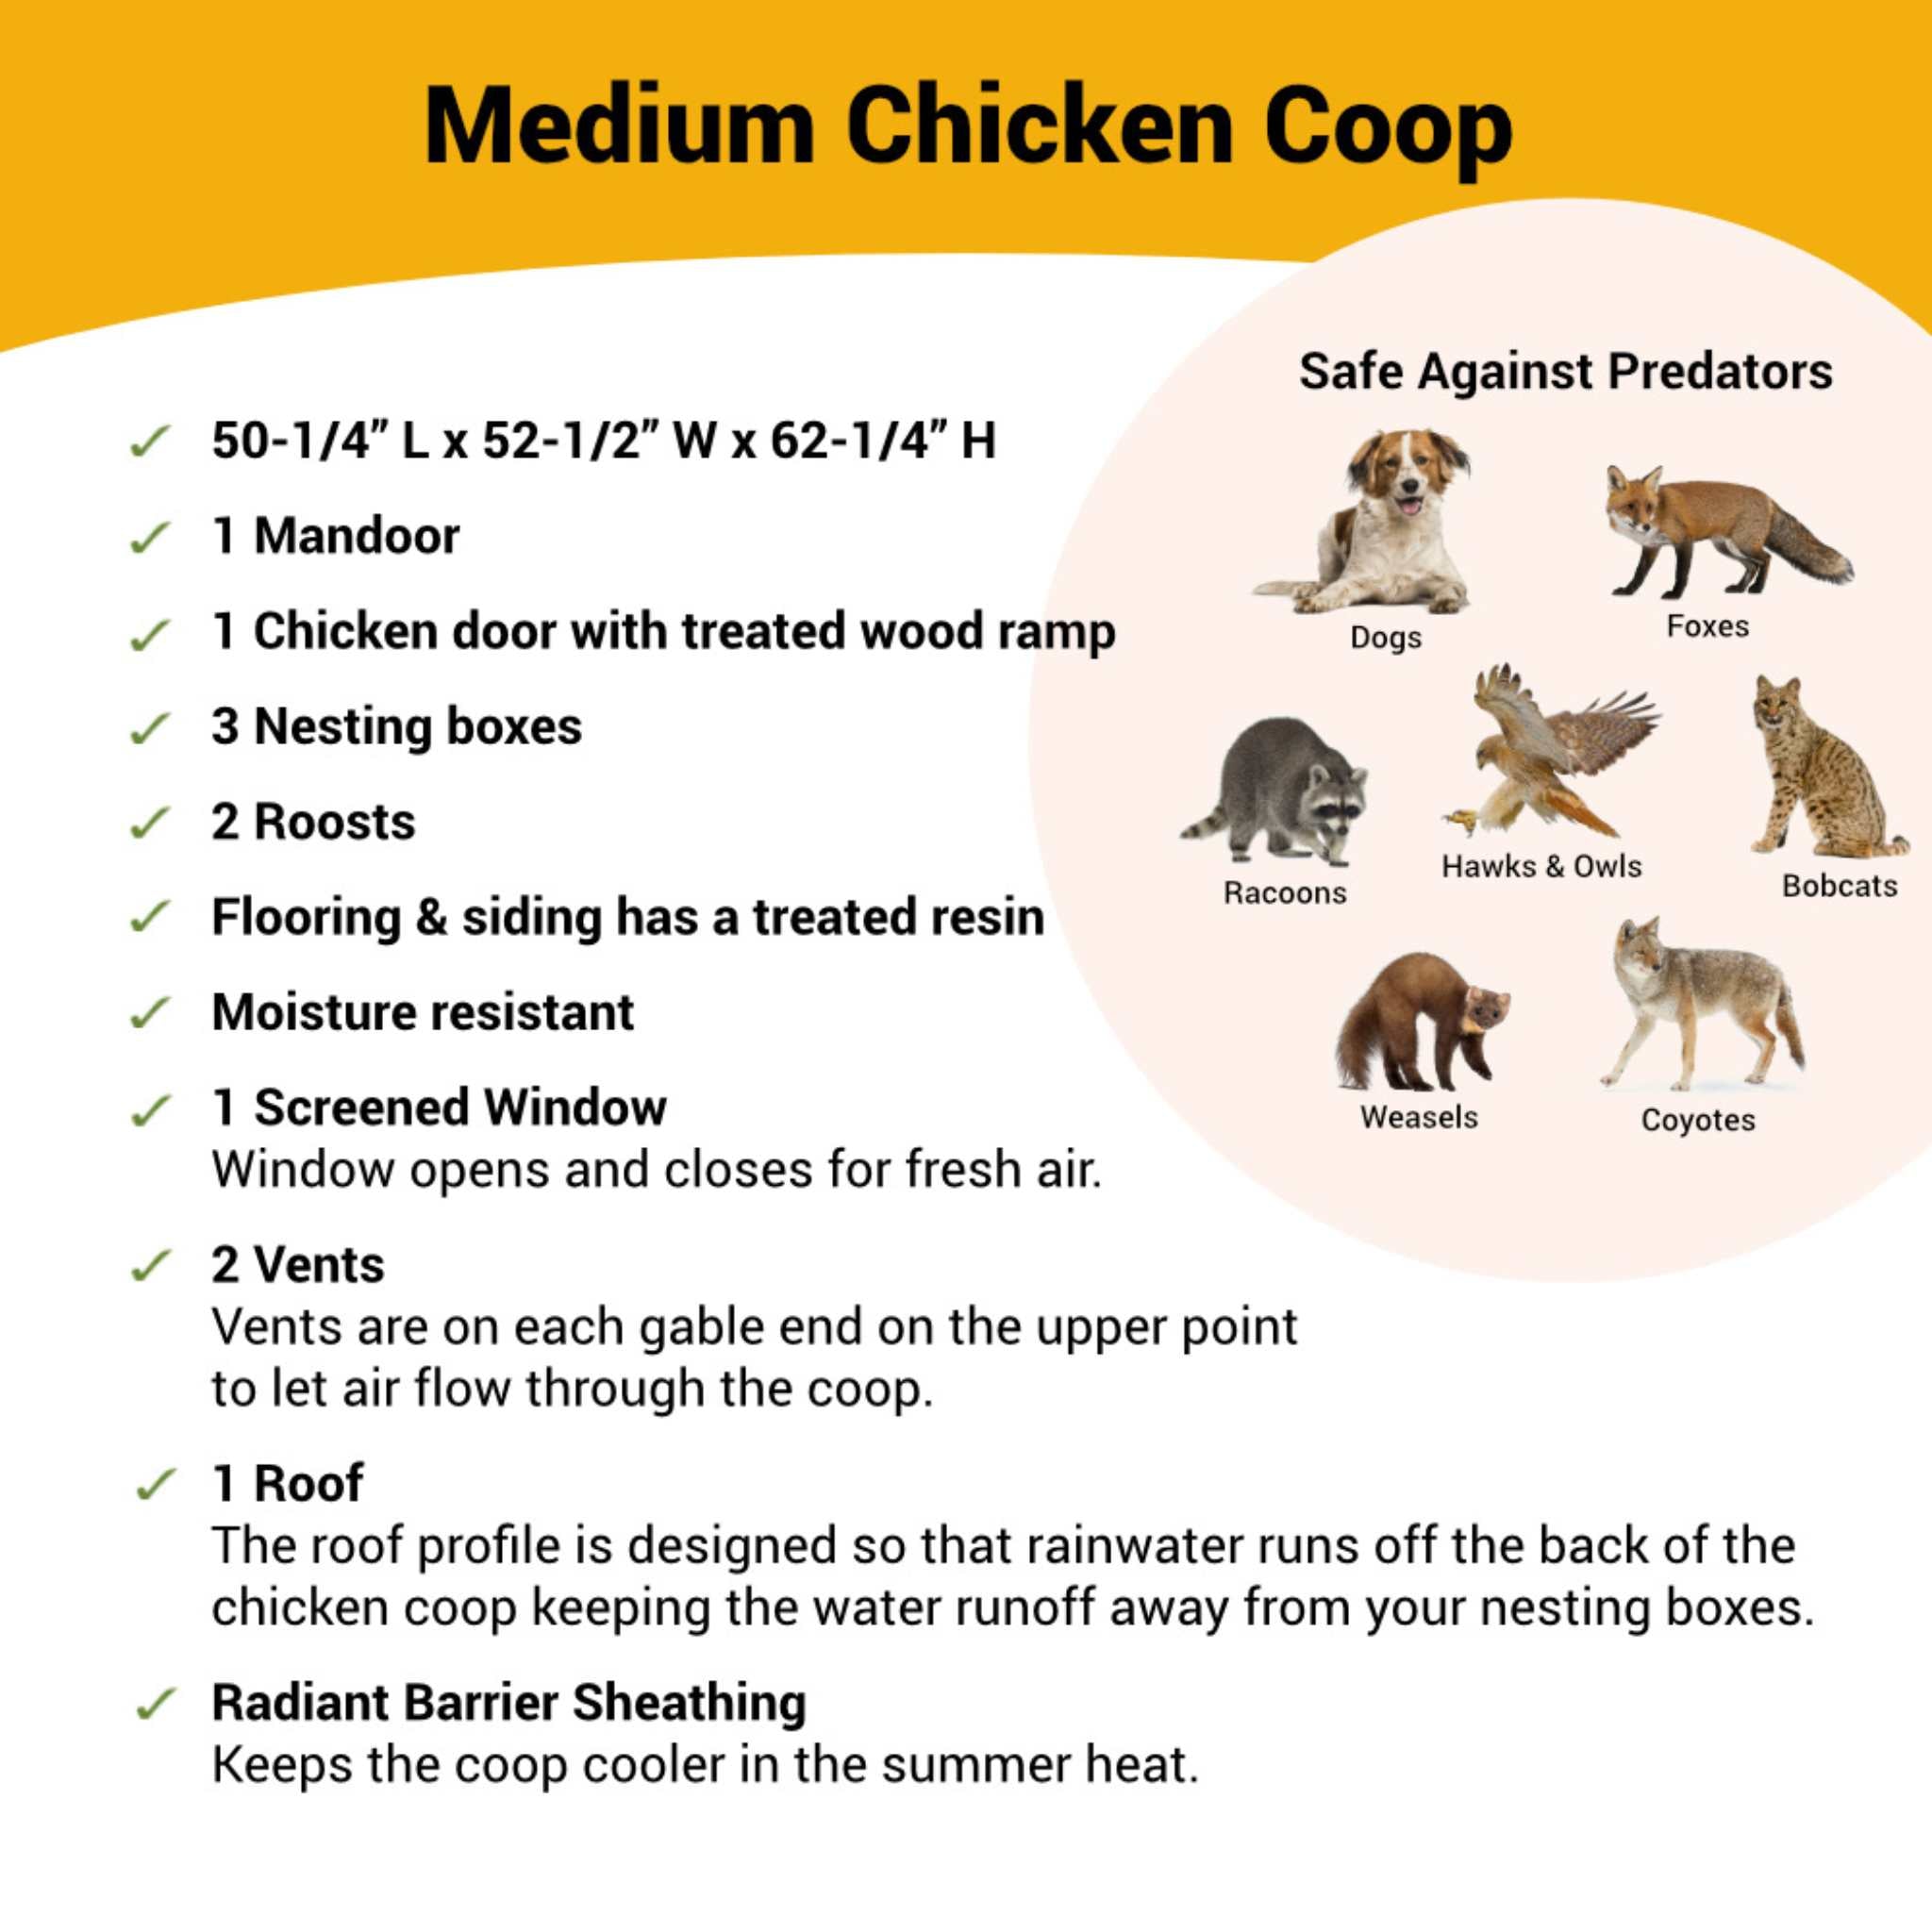 Hatching Time OverEZ Medium chicken coop infographic shows coop is safe against predators. dimensions and details are also shown in image for medium chicken coop.